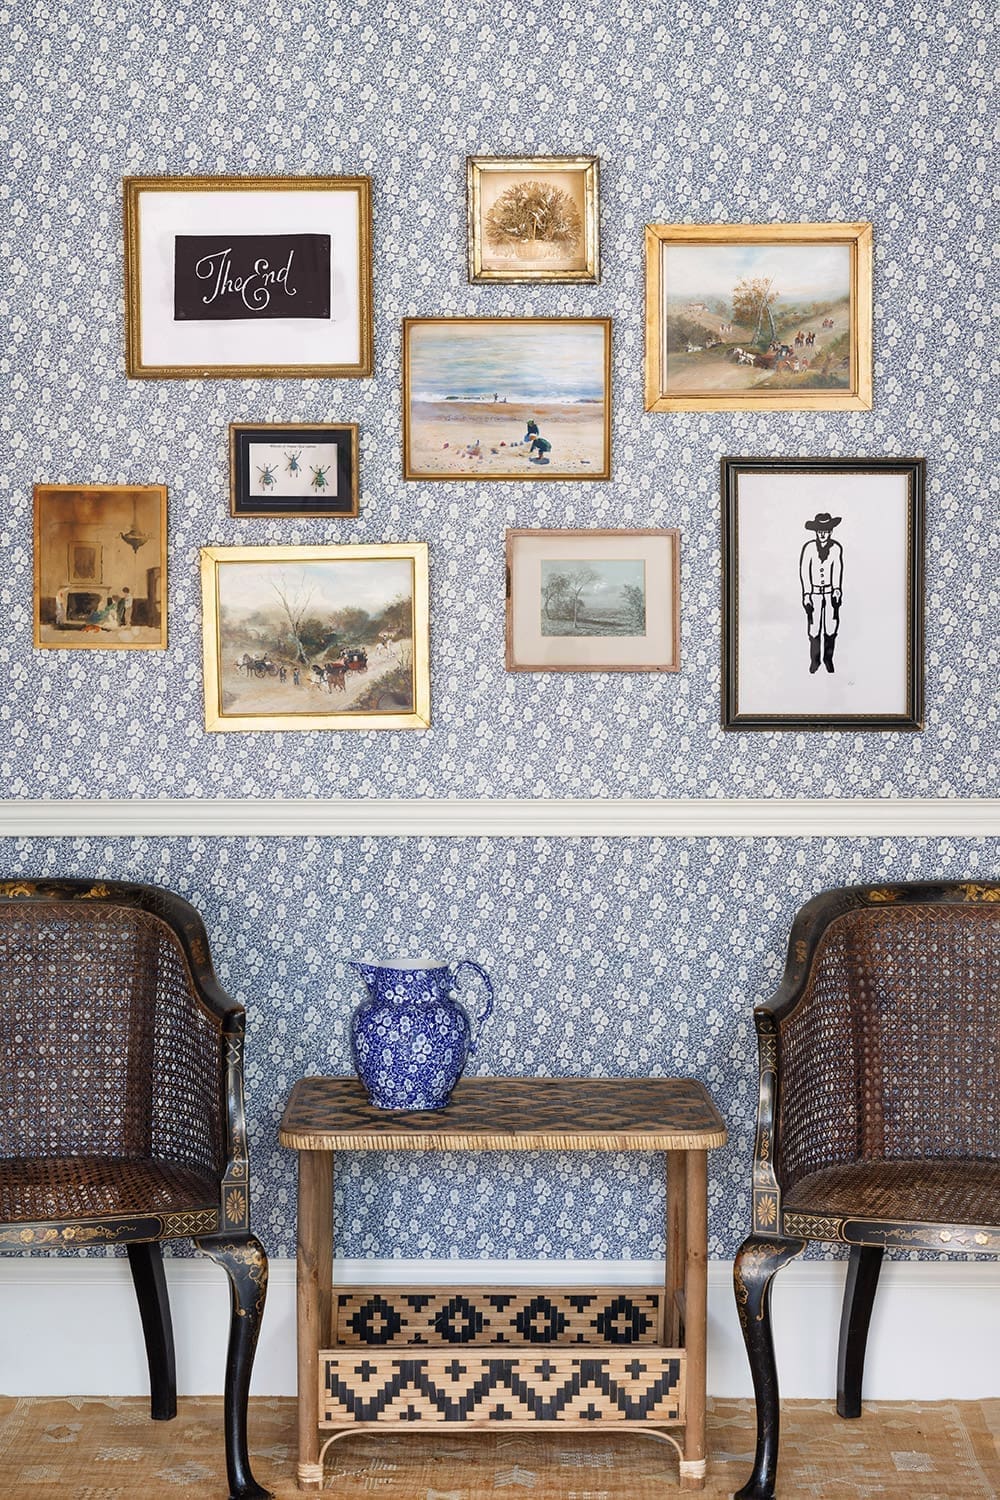 burleigh-barneby-gates-calico-navy-blue-wallpaper-ditsy-floral-cottage-wallpaper-made-in-england-callsical-interior